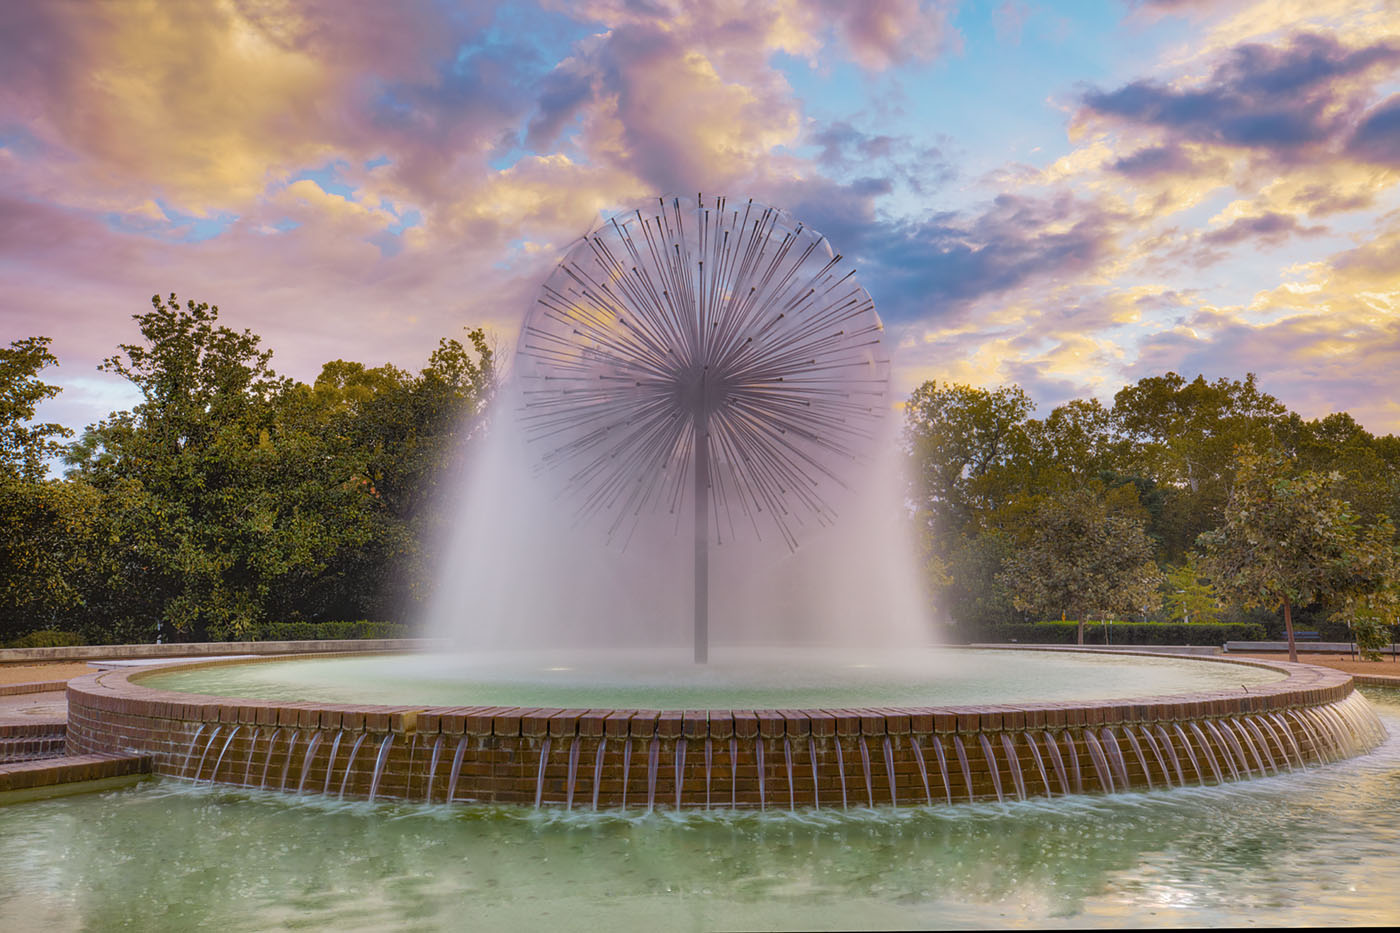 The Dandelion Fountain, formally knows as the Wortham Memorial Fountain, keeps the water flowing on a cool November morning just after sunrise. This fountain sits alongside Allen Parkway near Buffalo Bayou.